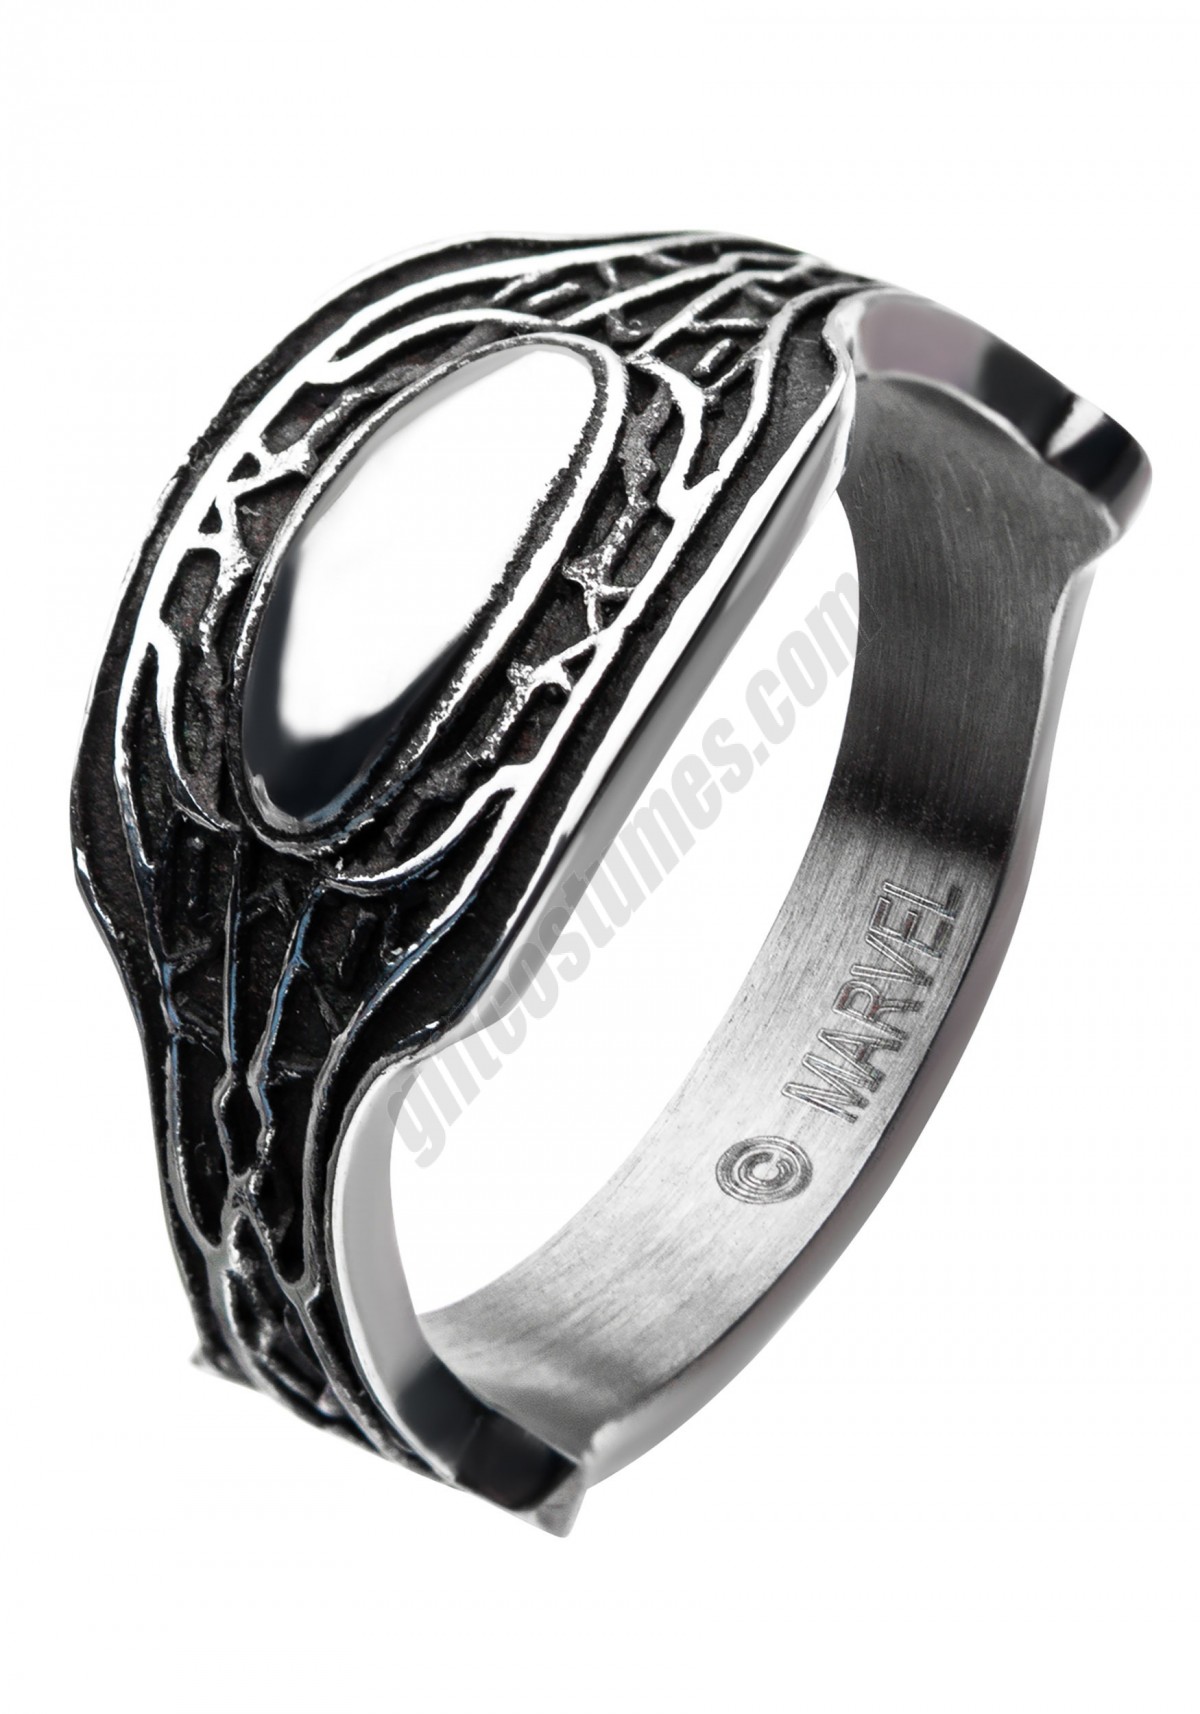 Black Panther T'Challa Sized Ring Promotions - -1